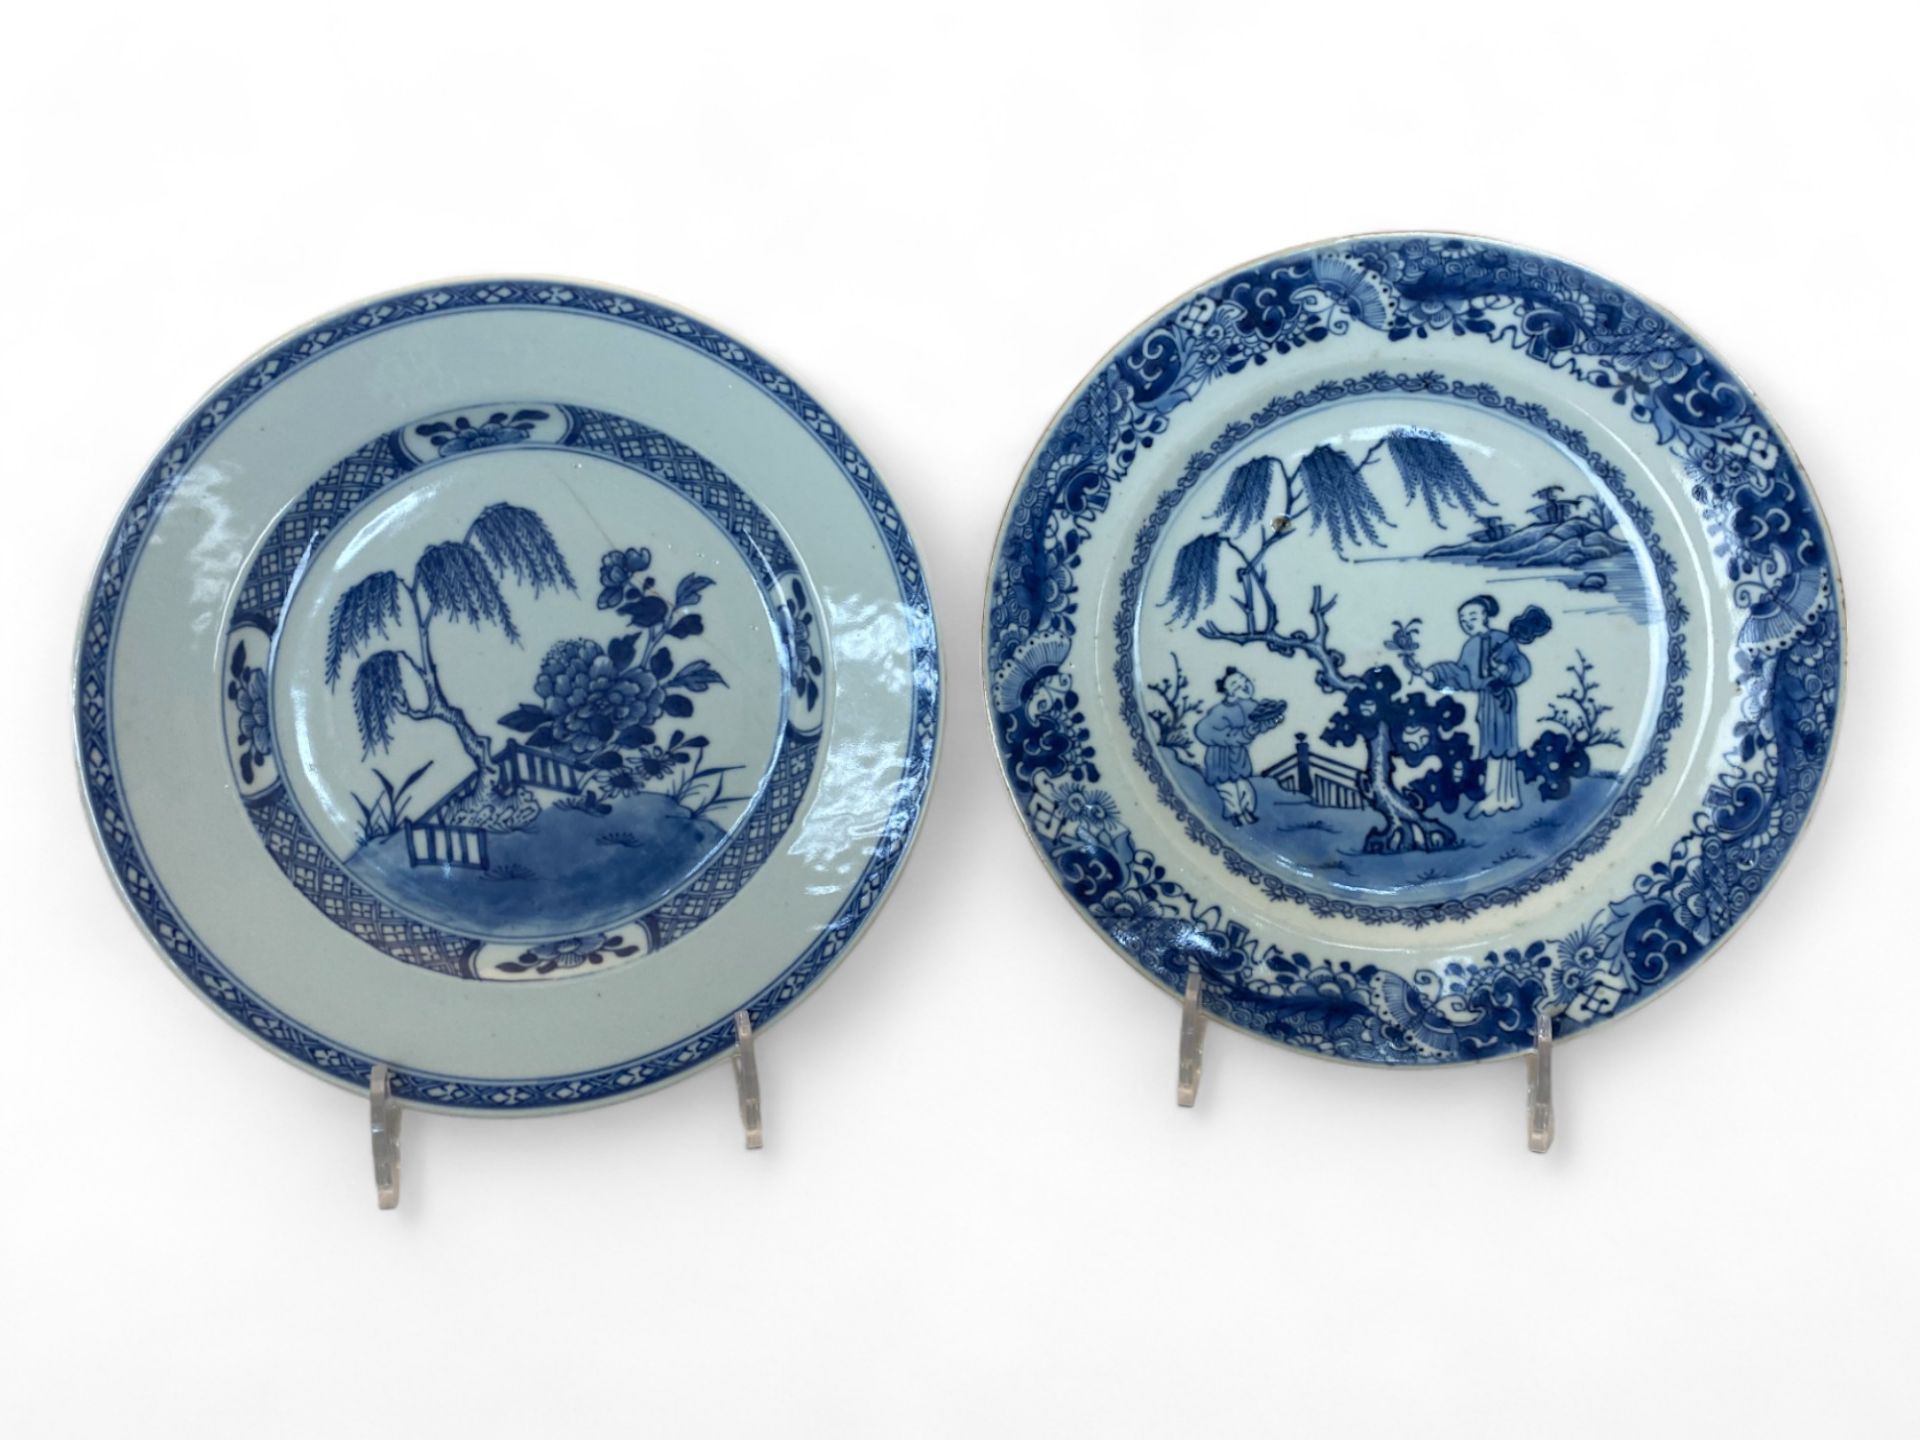 A 19th century Chinese blue and white peony pattern plate and a 19th century Chinese willow pattern - Image 2 of 6